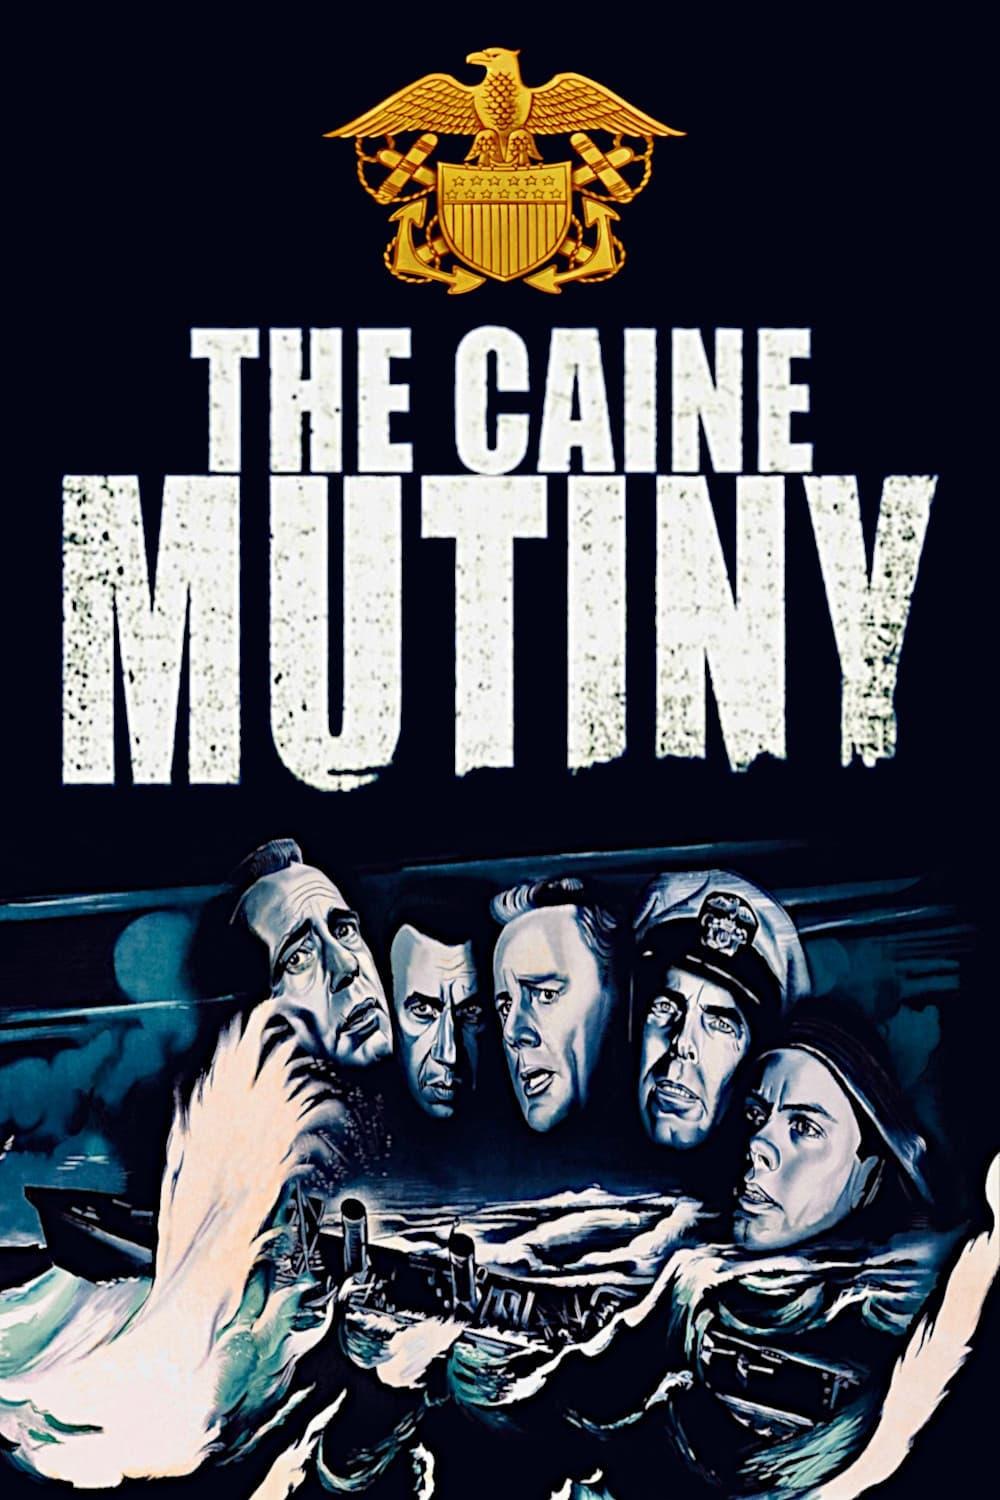 The Caine Mutiny poster